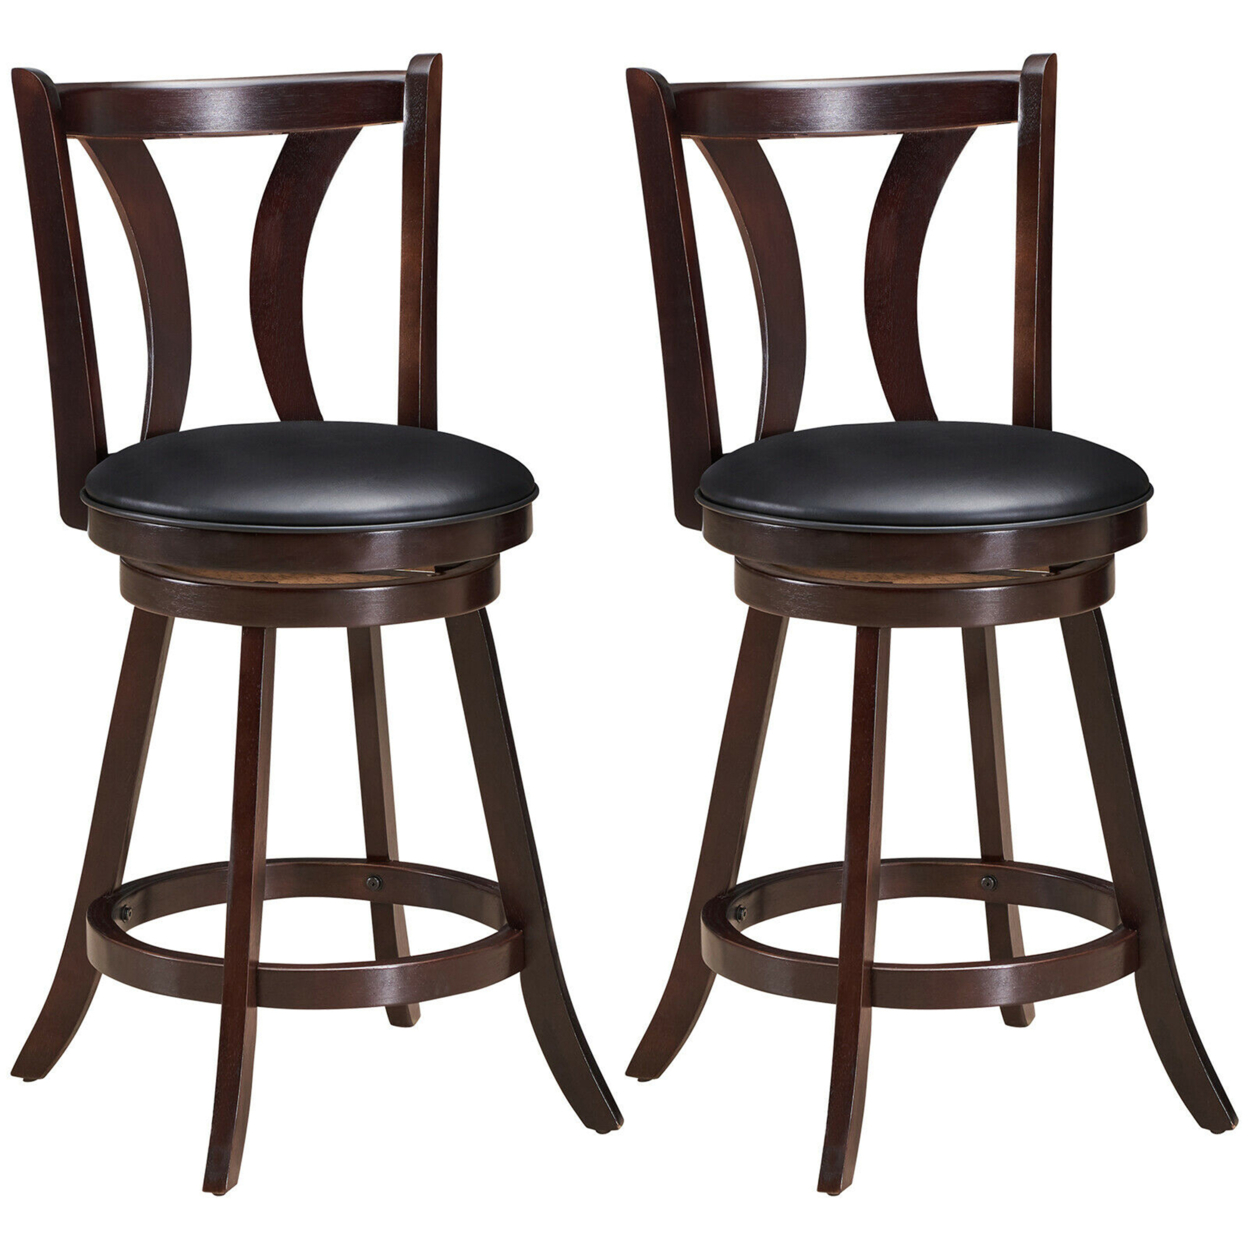 Set Of 2 Swivel Bar Stool 24'' Counter Height Leather Padded Dining Kitchen Chair